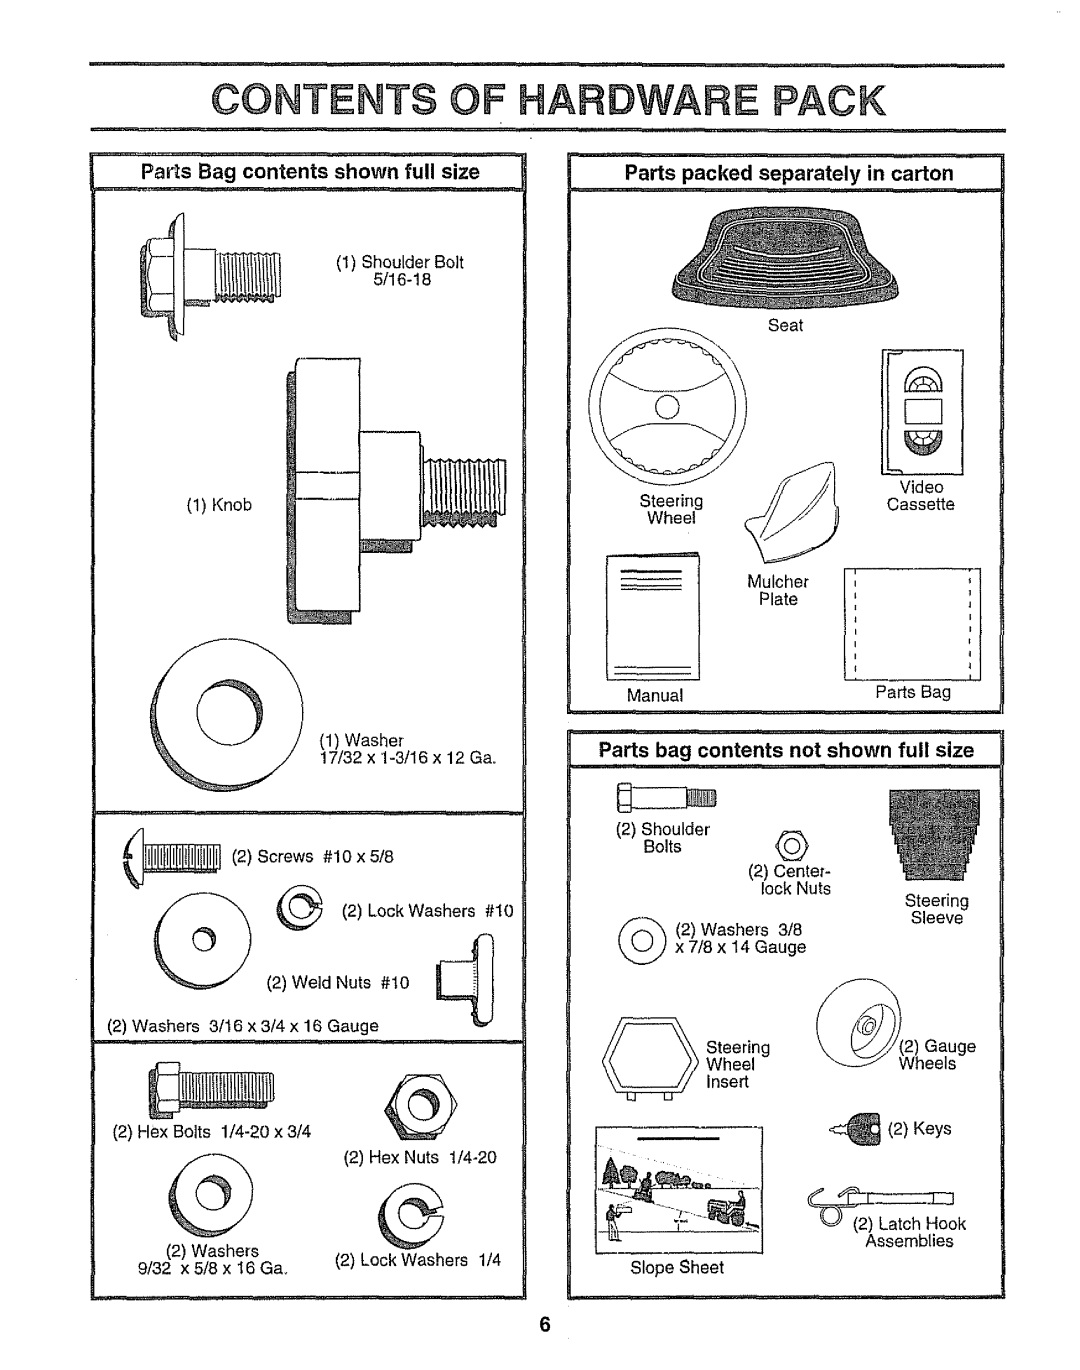 Sears 917.25958 manual Parts Bag contents shown full size, Parts packed separately in carton, Contents Of, Pack 